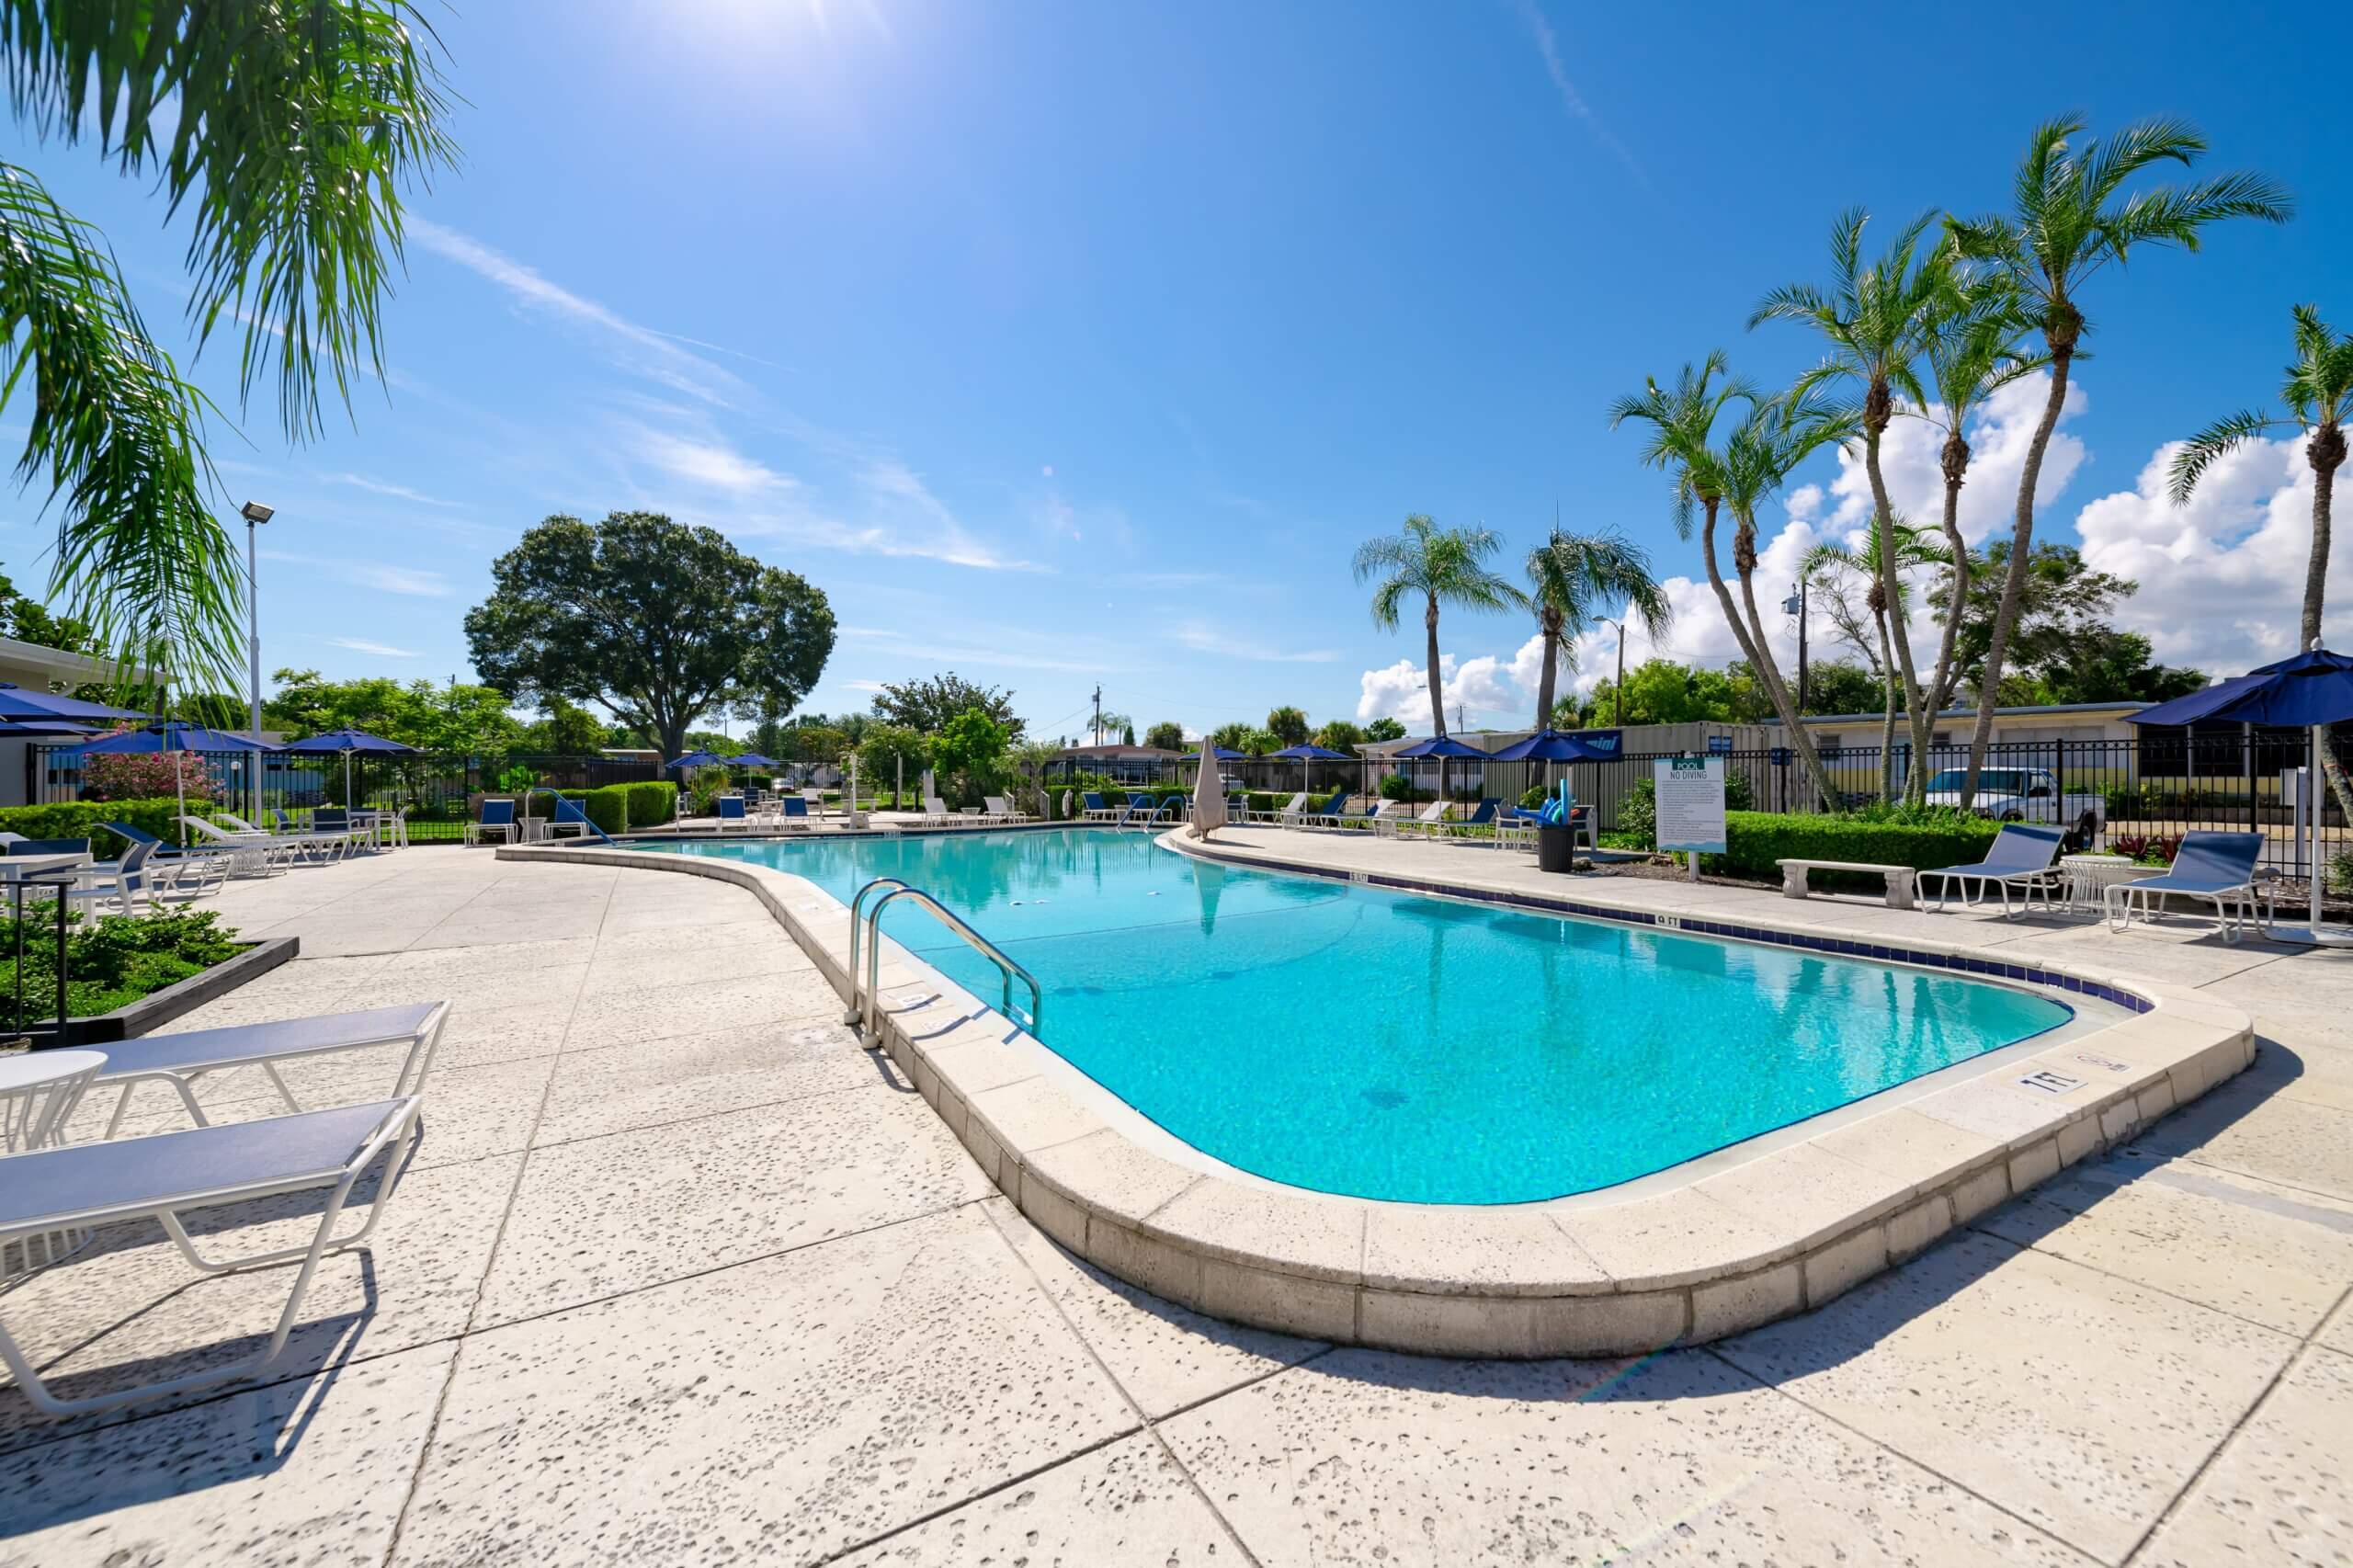 Fenced swimming pool area, with quarry-tile floors and outdoor blue sunbeds and chairs.